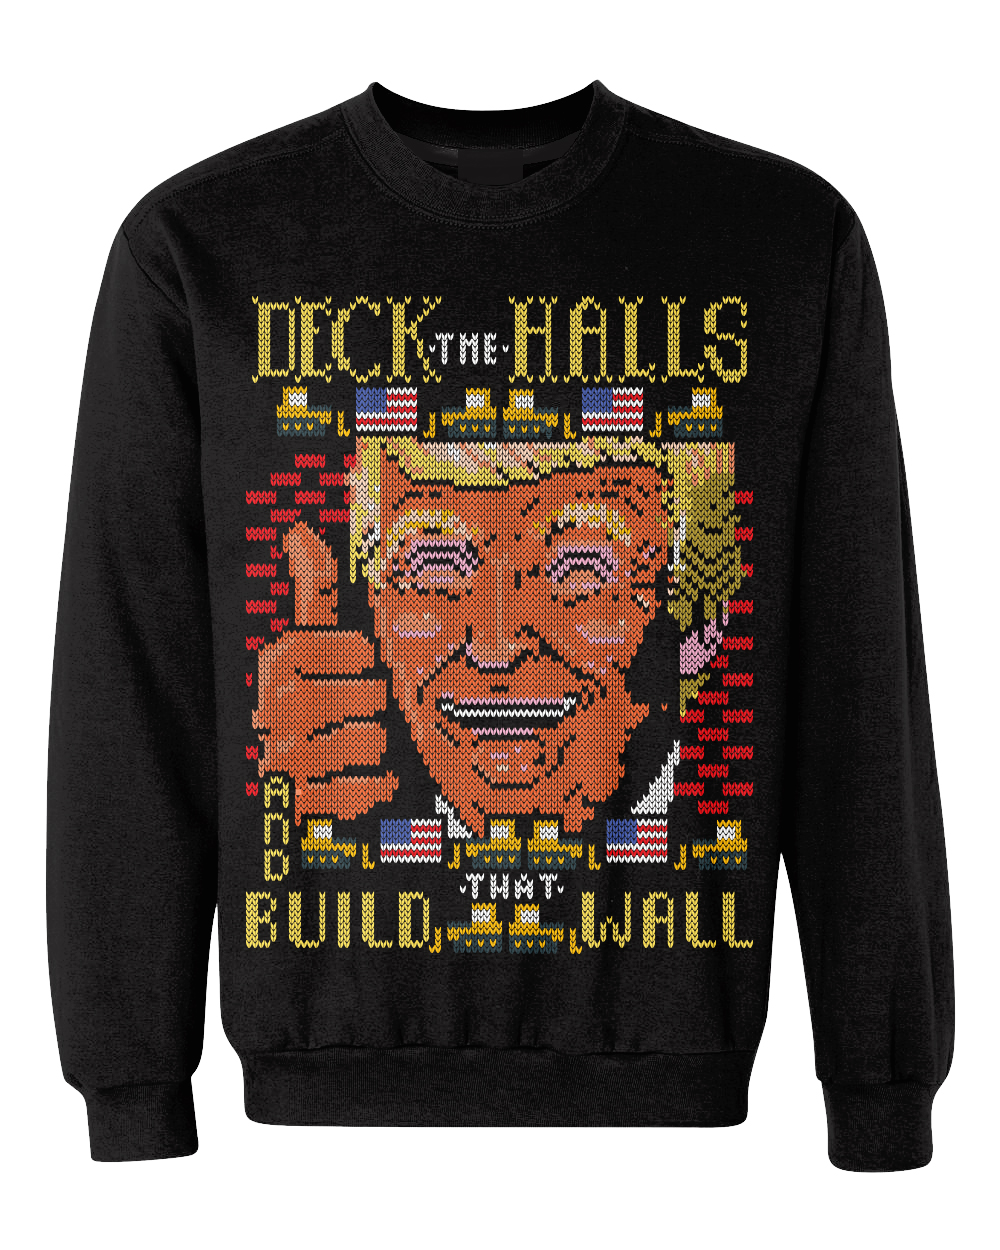 Insensitive or all in good fun? "DECK THE HALLS and BUILD THAT WALL"